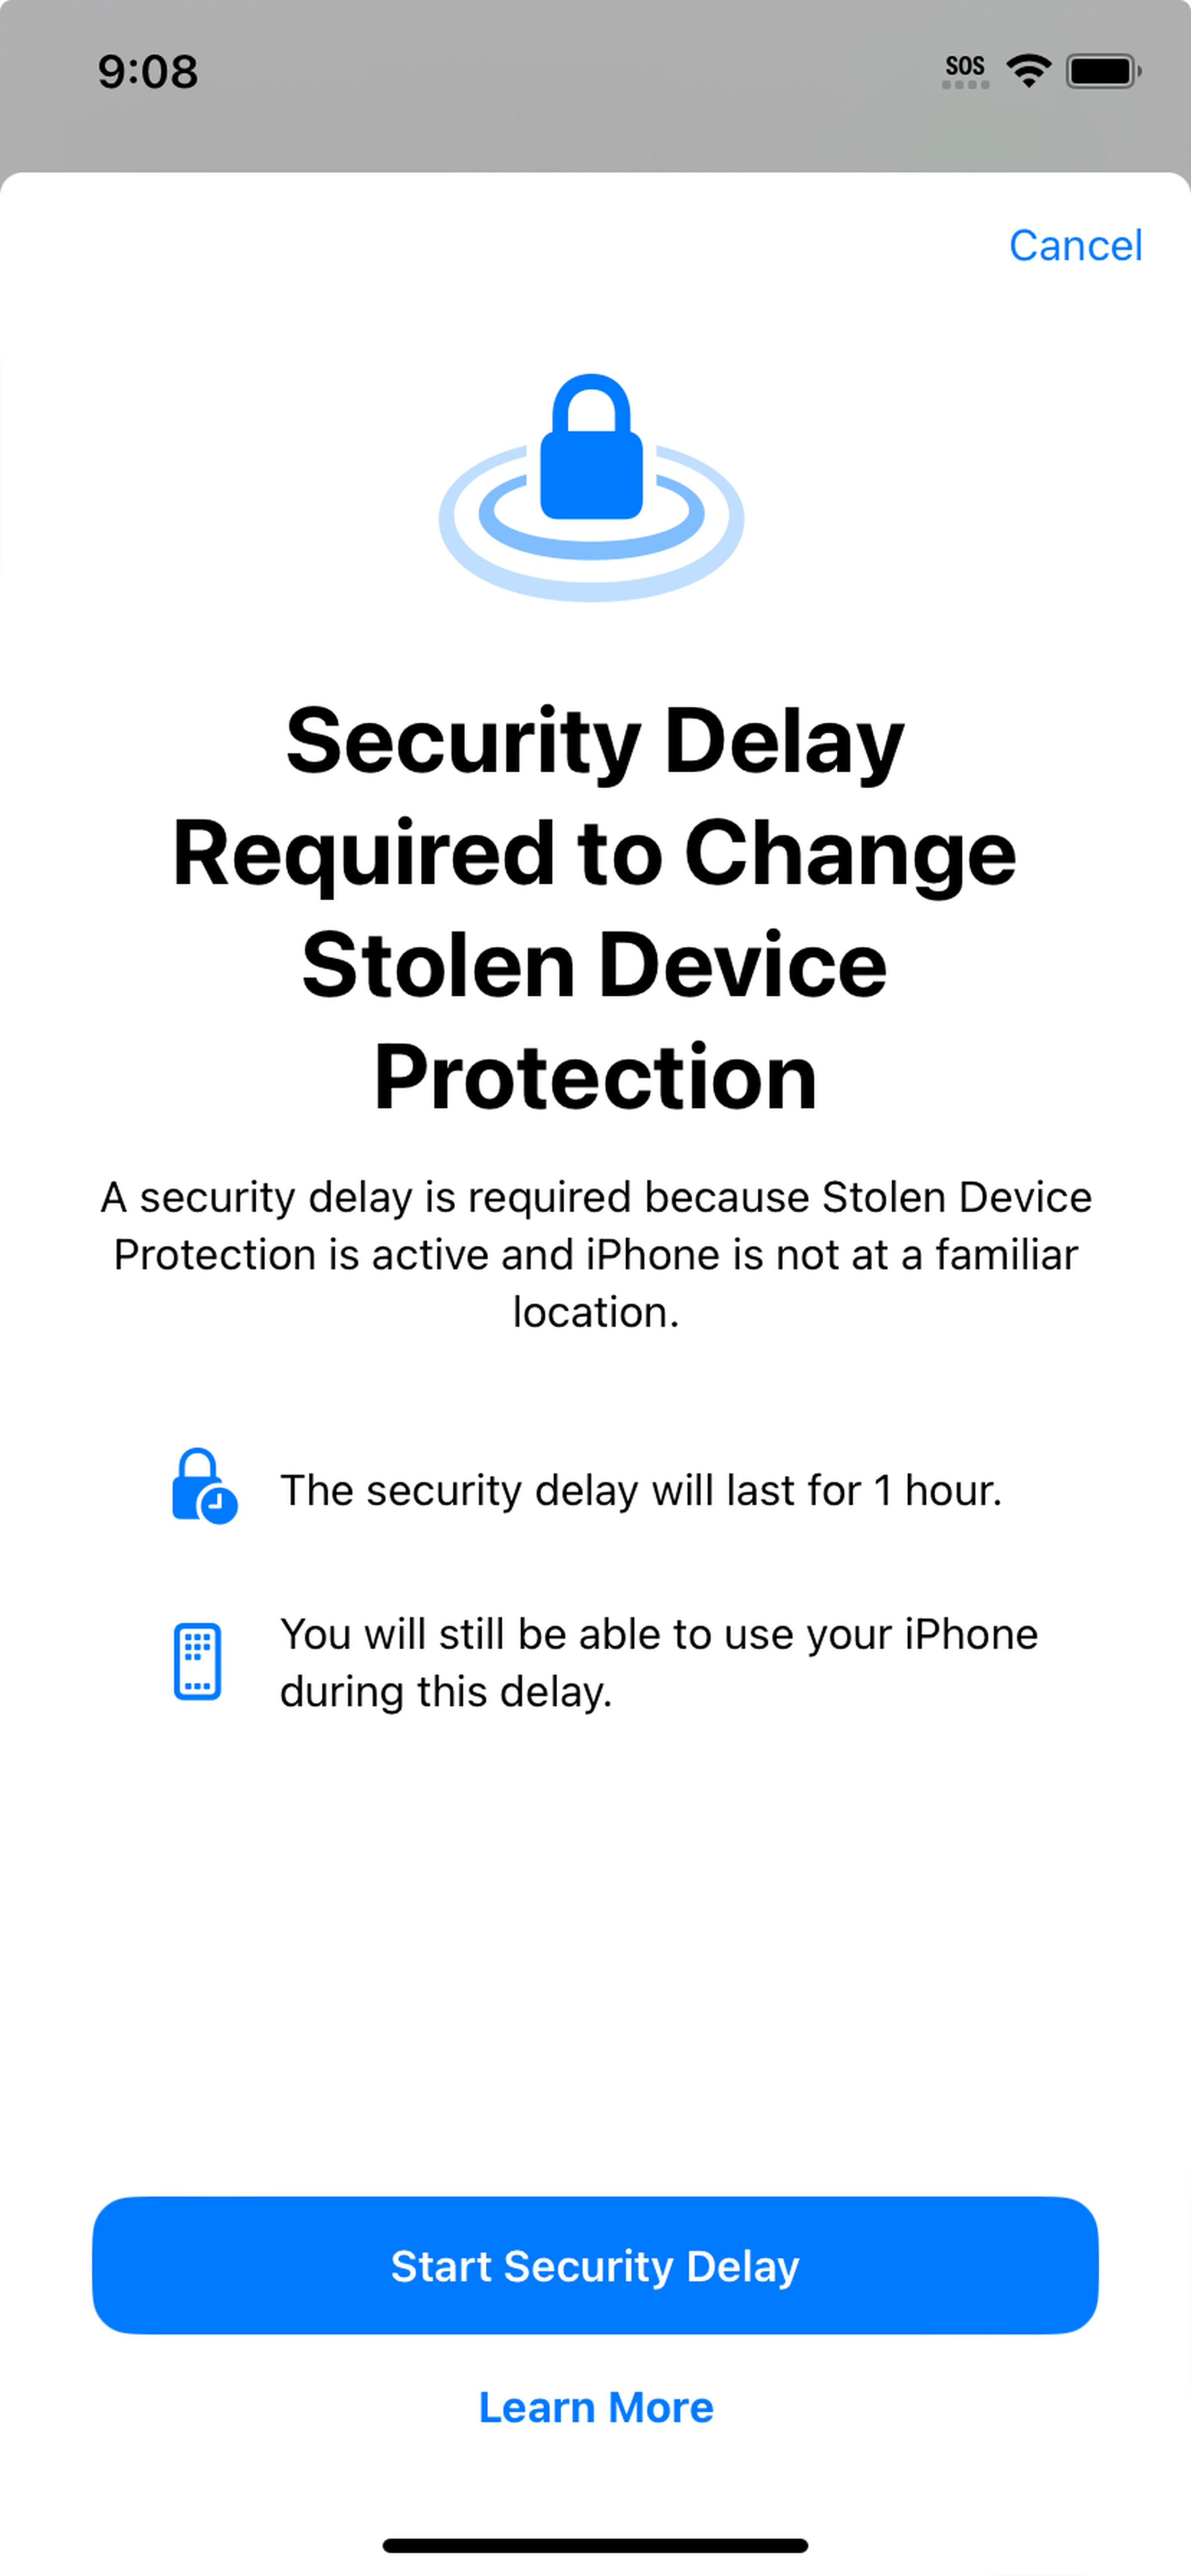 iPhone screen saying “Security Delay Required to Change Stolen Device Protection”